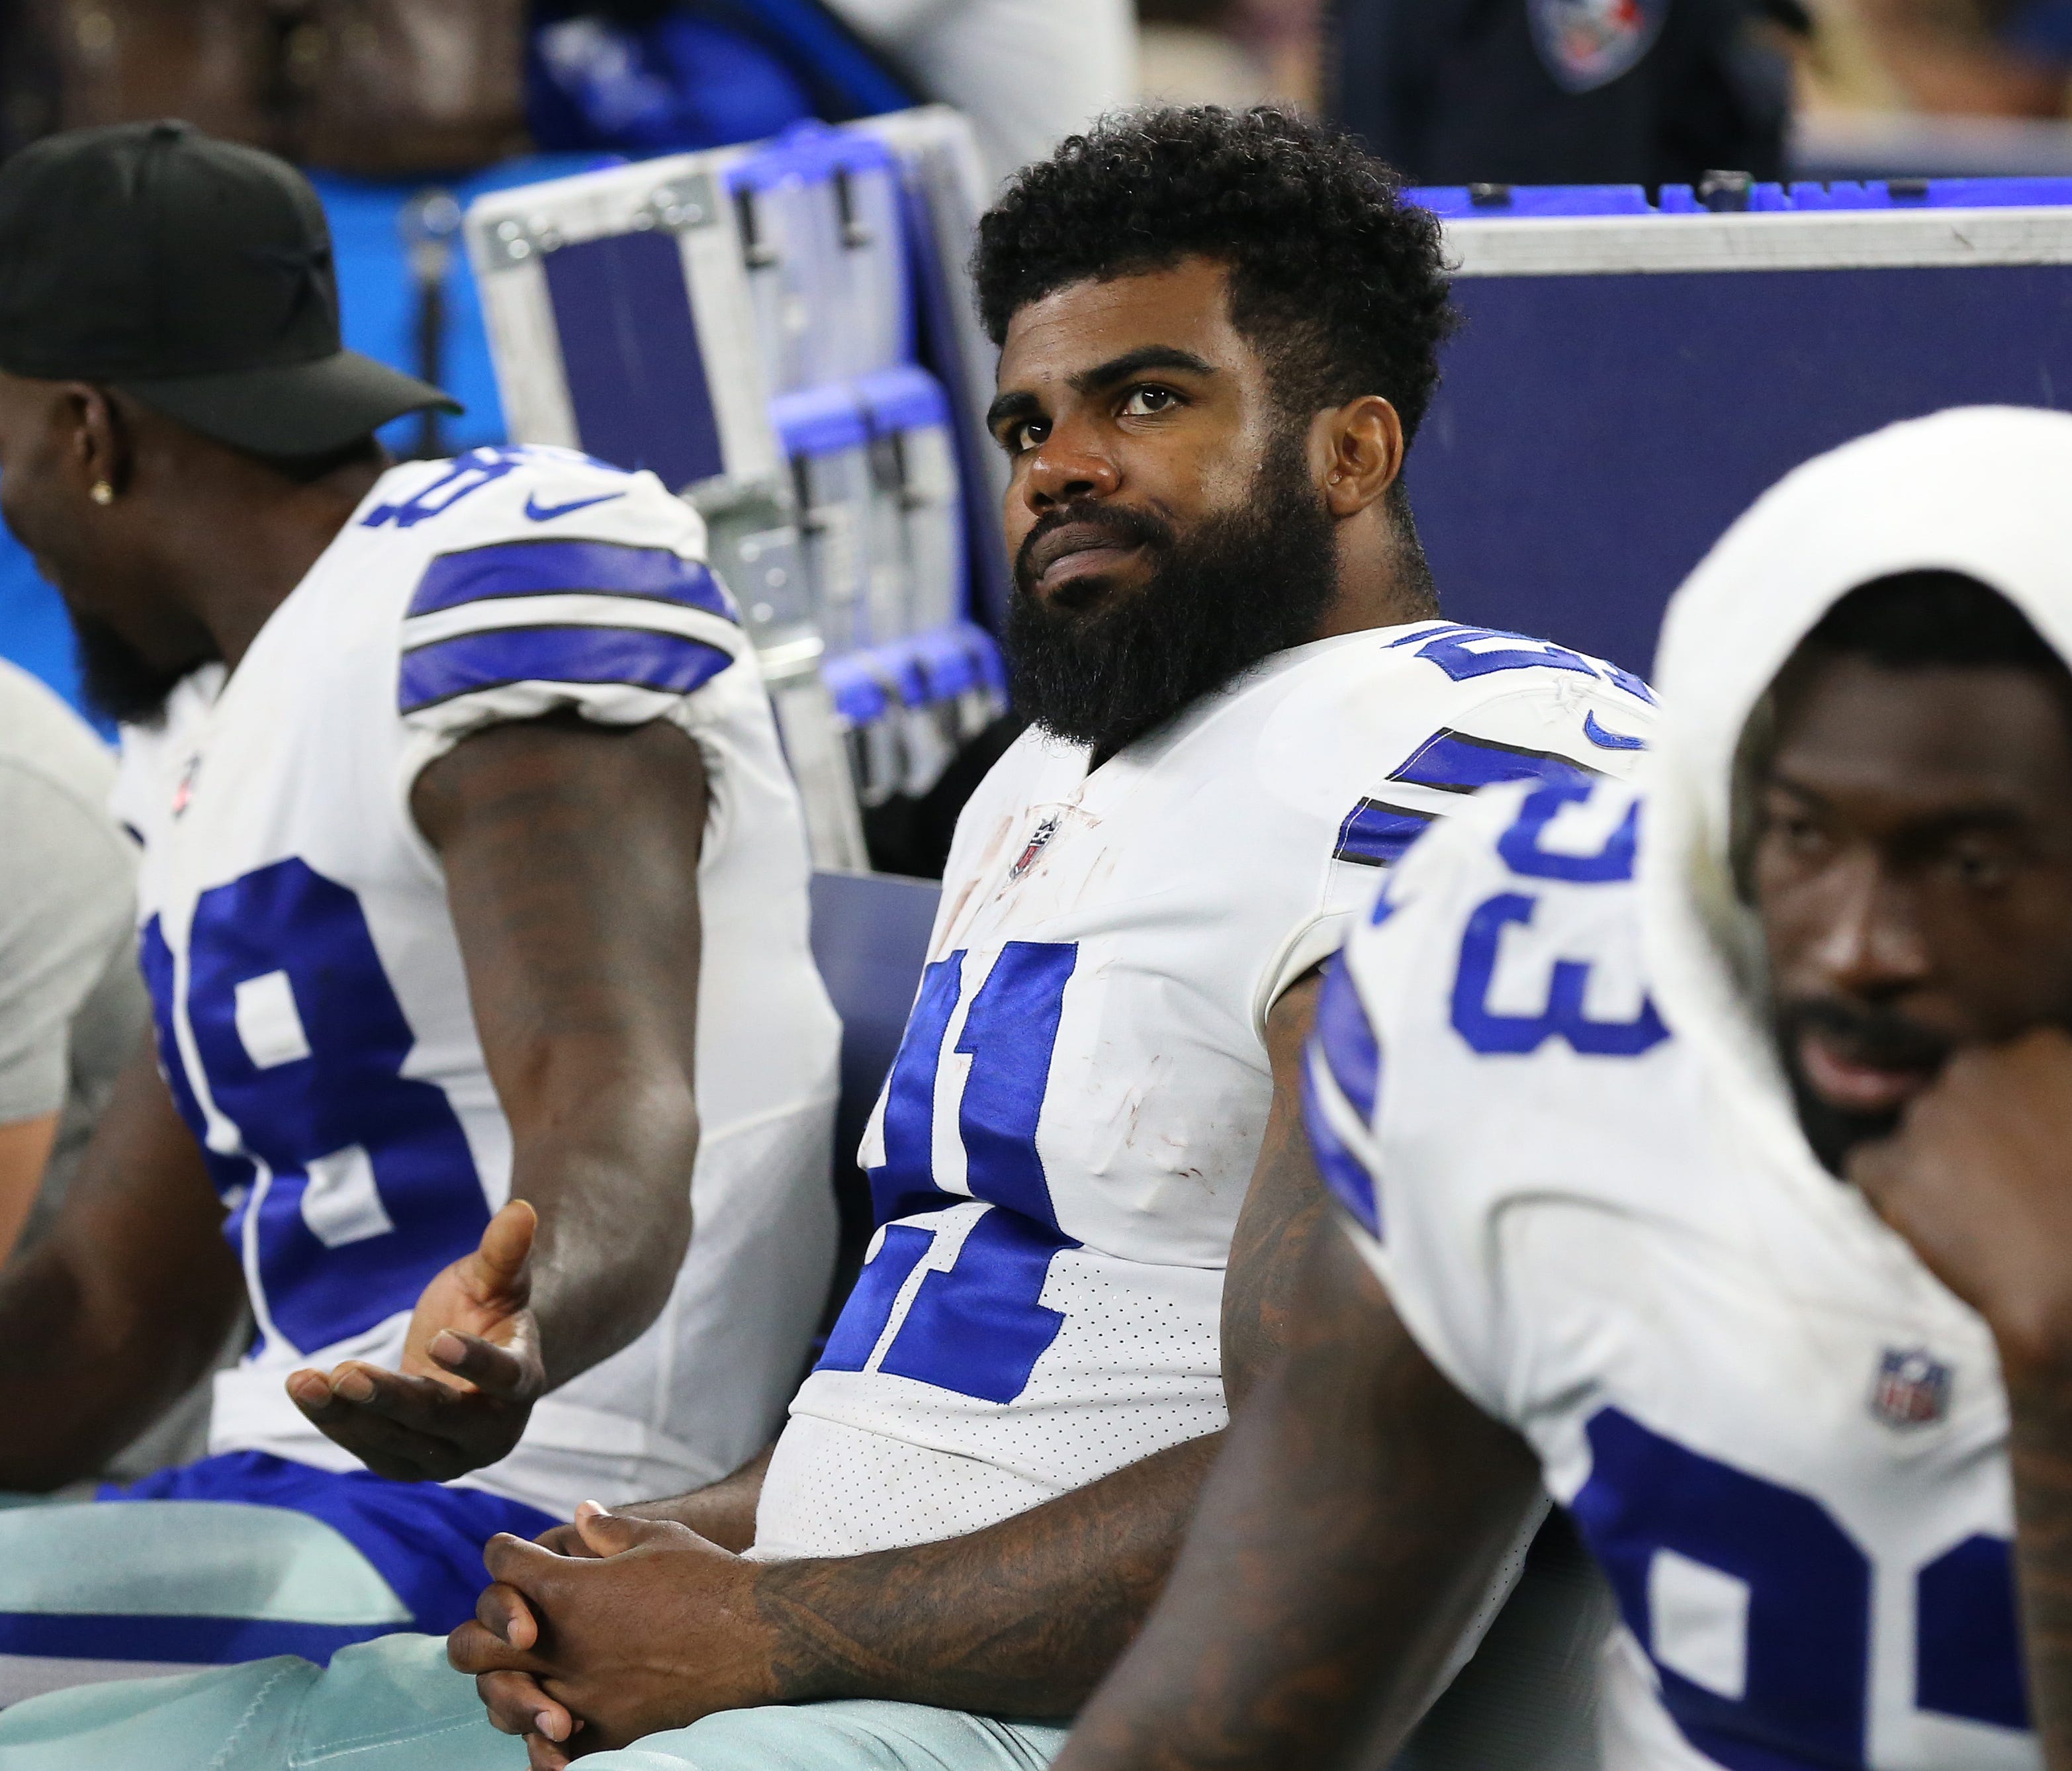 Dallas Cowboys  running back Ezekiel Elliott (21) on the bench during the game against the Oakland Raiders at AT&T Stadium.